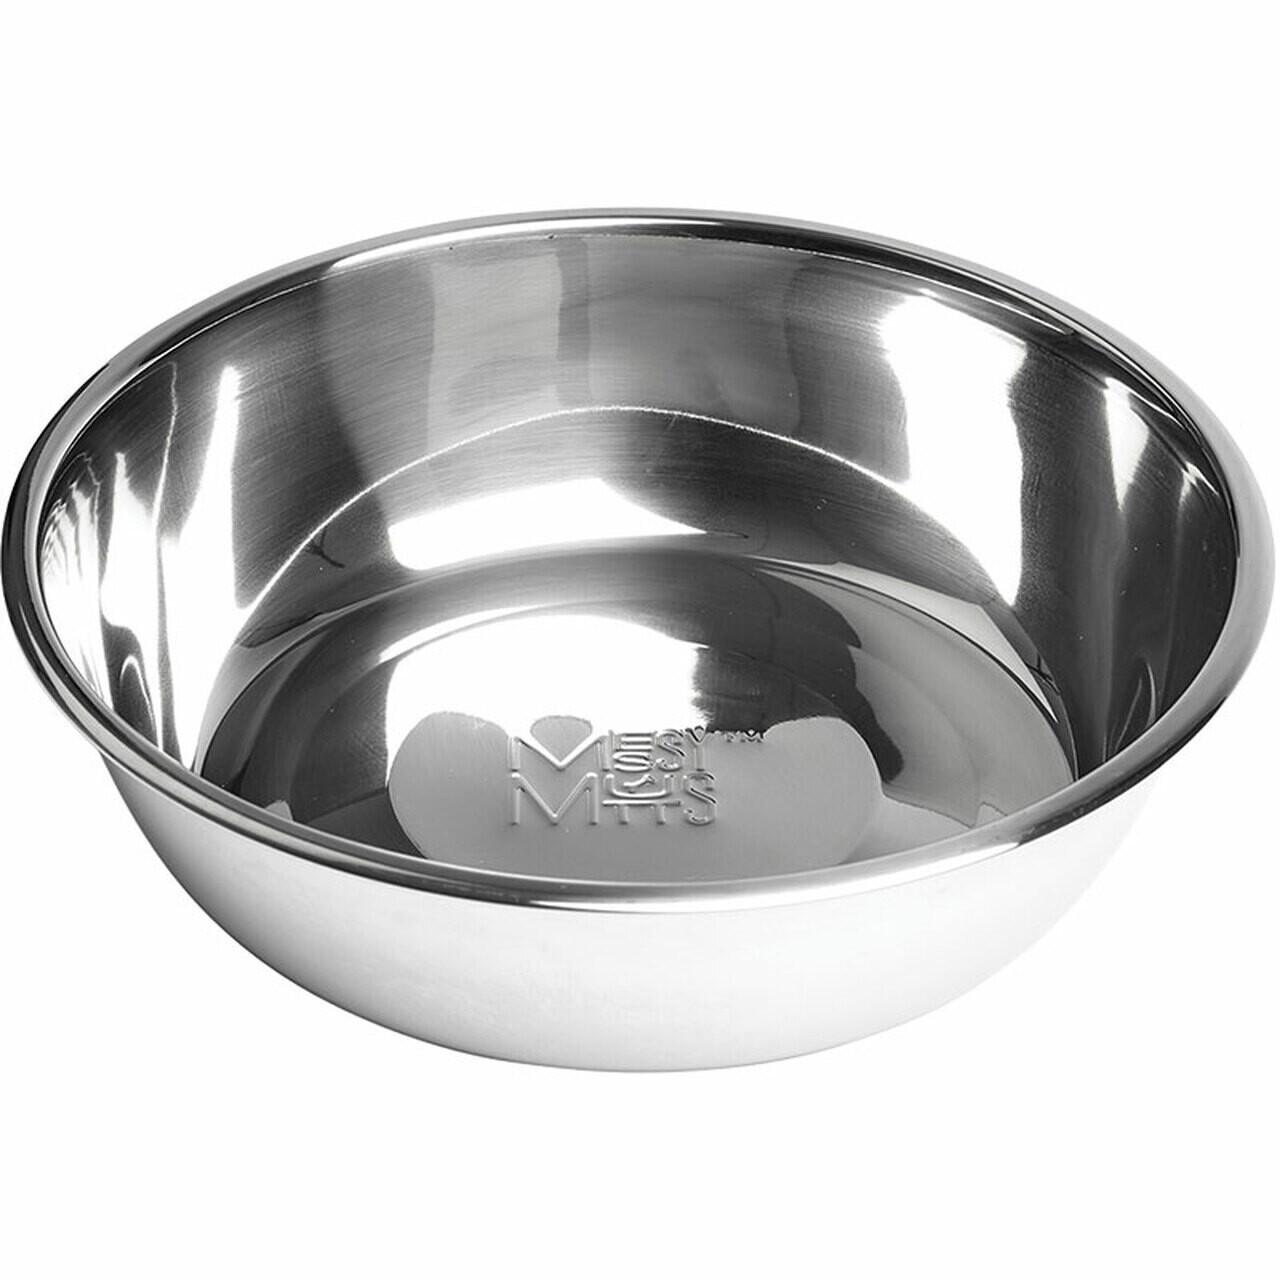 MESSY MUTTS CAT BOWL STAINLESS STEEL 1.75 CUP